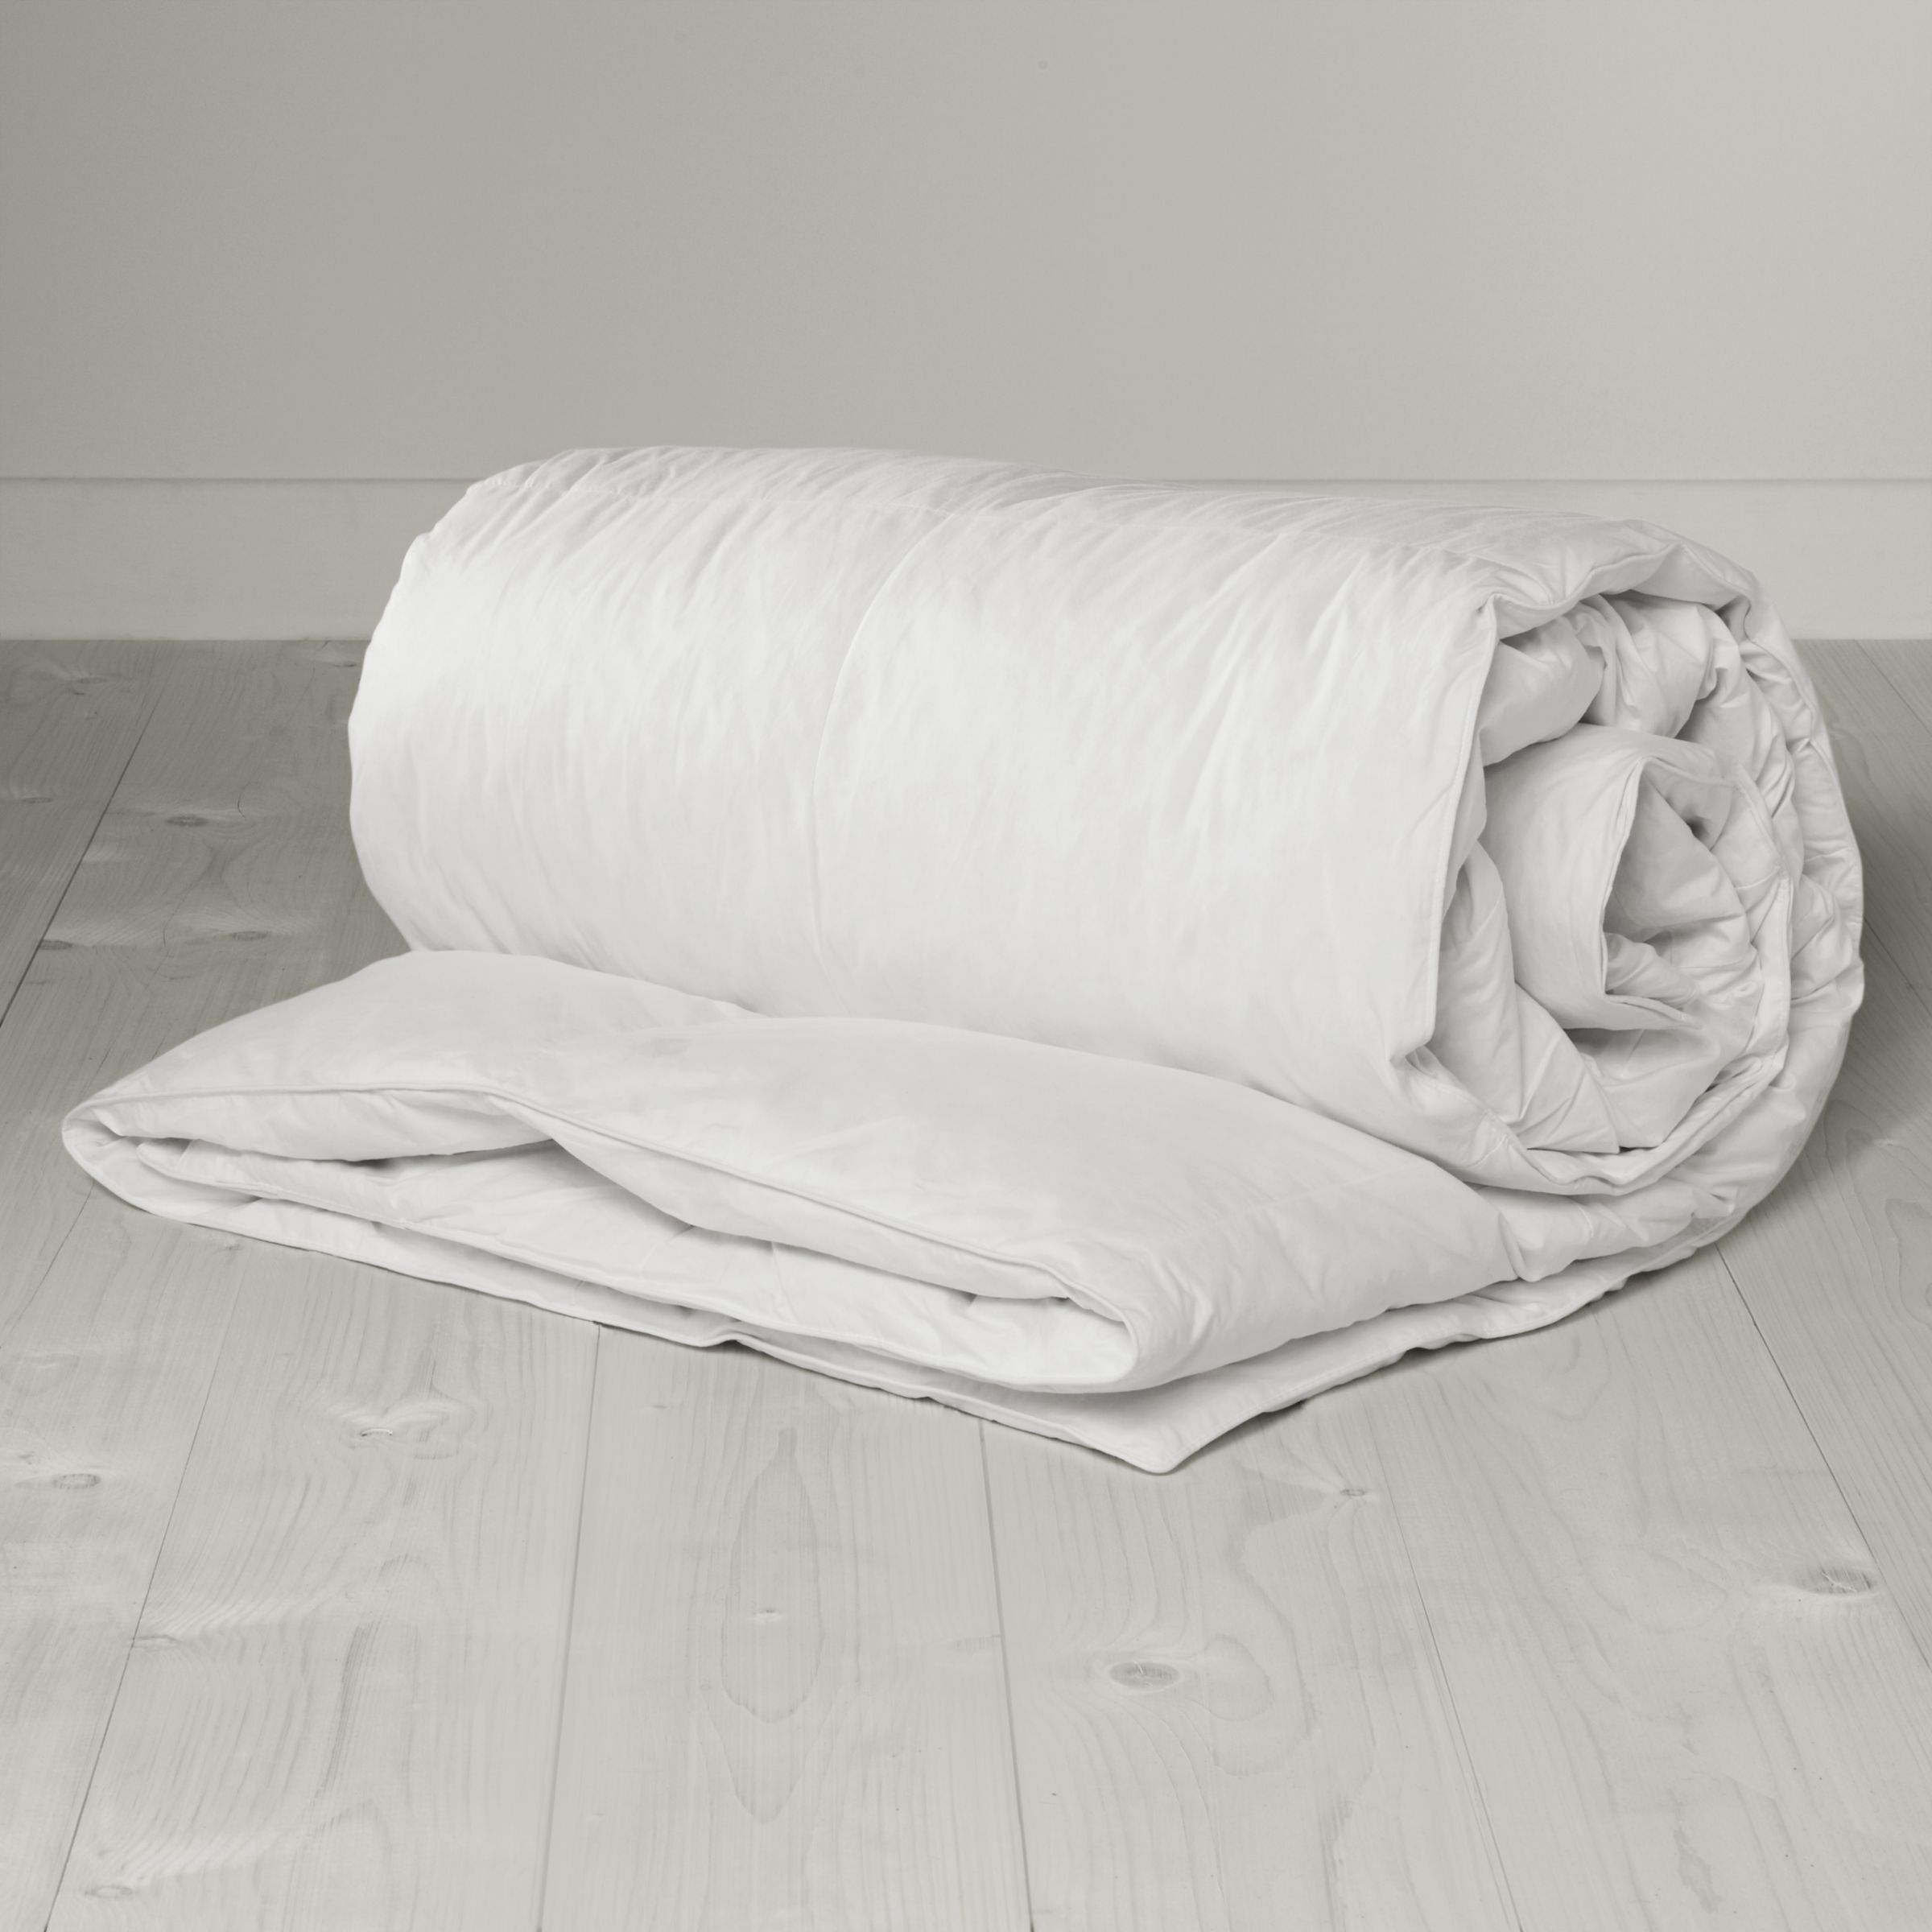 John Lewis Duck Feather and Down Duvets, 10.5